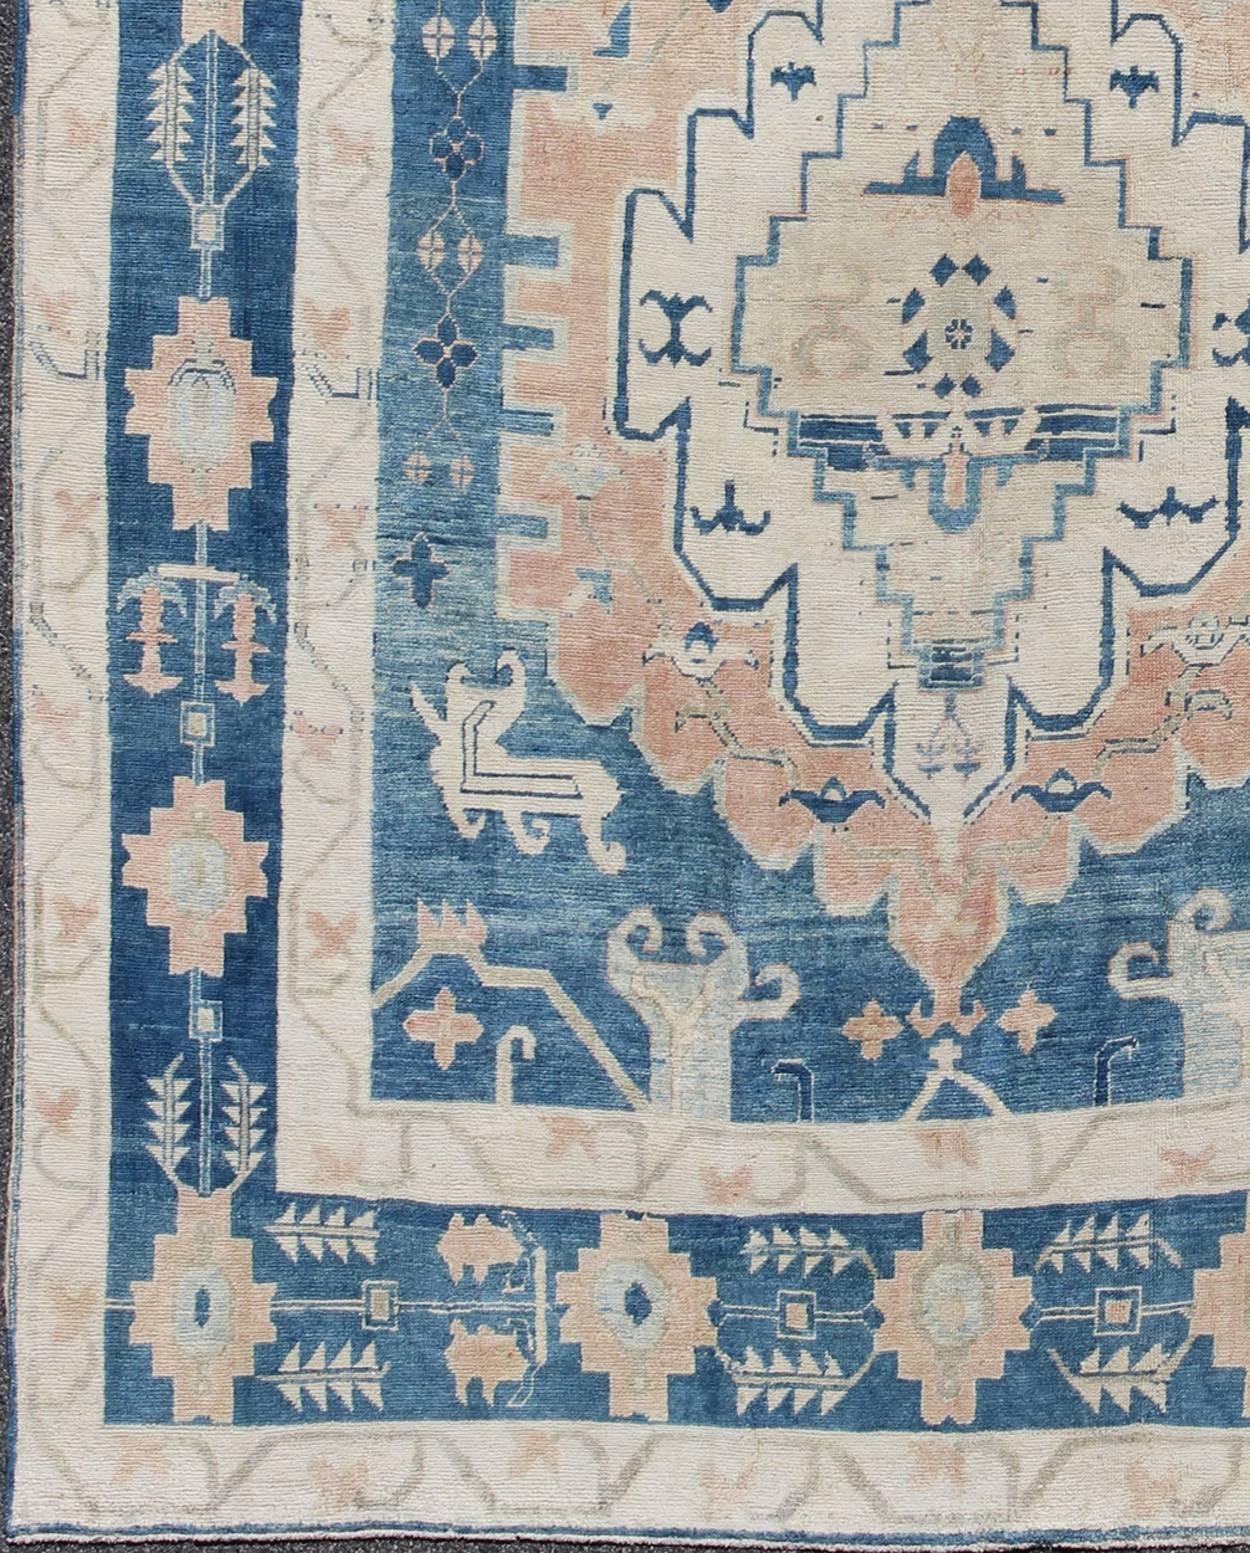 Blue and Salmon Vintage Turkish Oushak Rug with Layered Medallion and Motifs. Keivan Woven Arts /  rug / EN-165189, country of origin / type: Turkey / Oushak, Mid-20th century. 
Measures: 9'11 x 11'8.
This beautiful vintage rug from mid-20th century